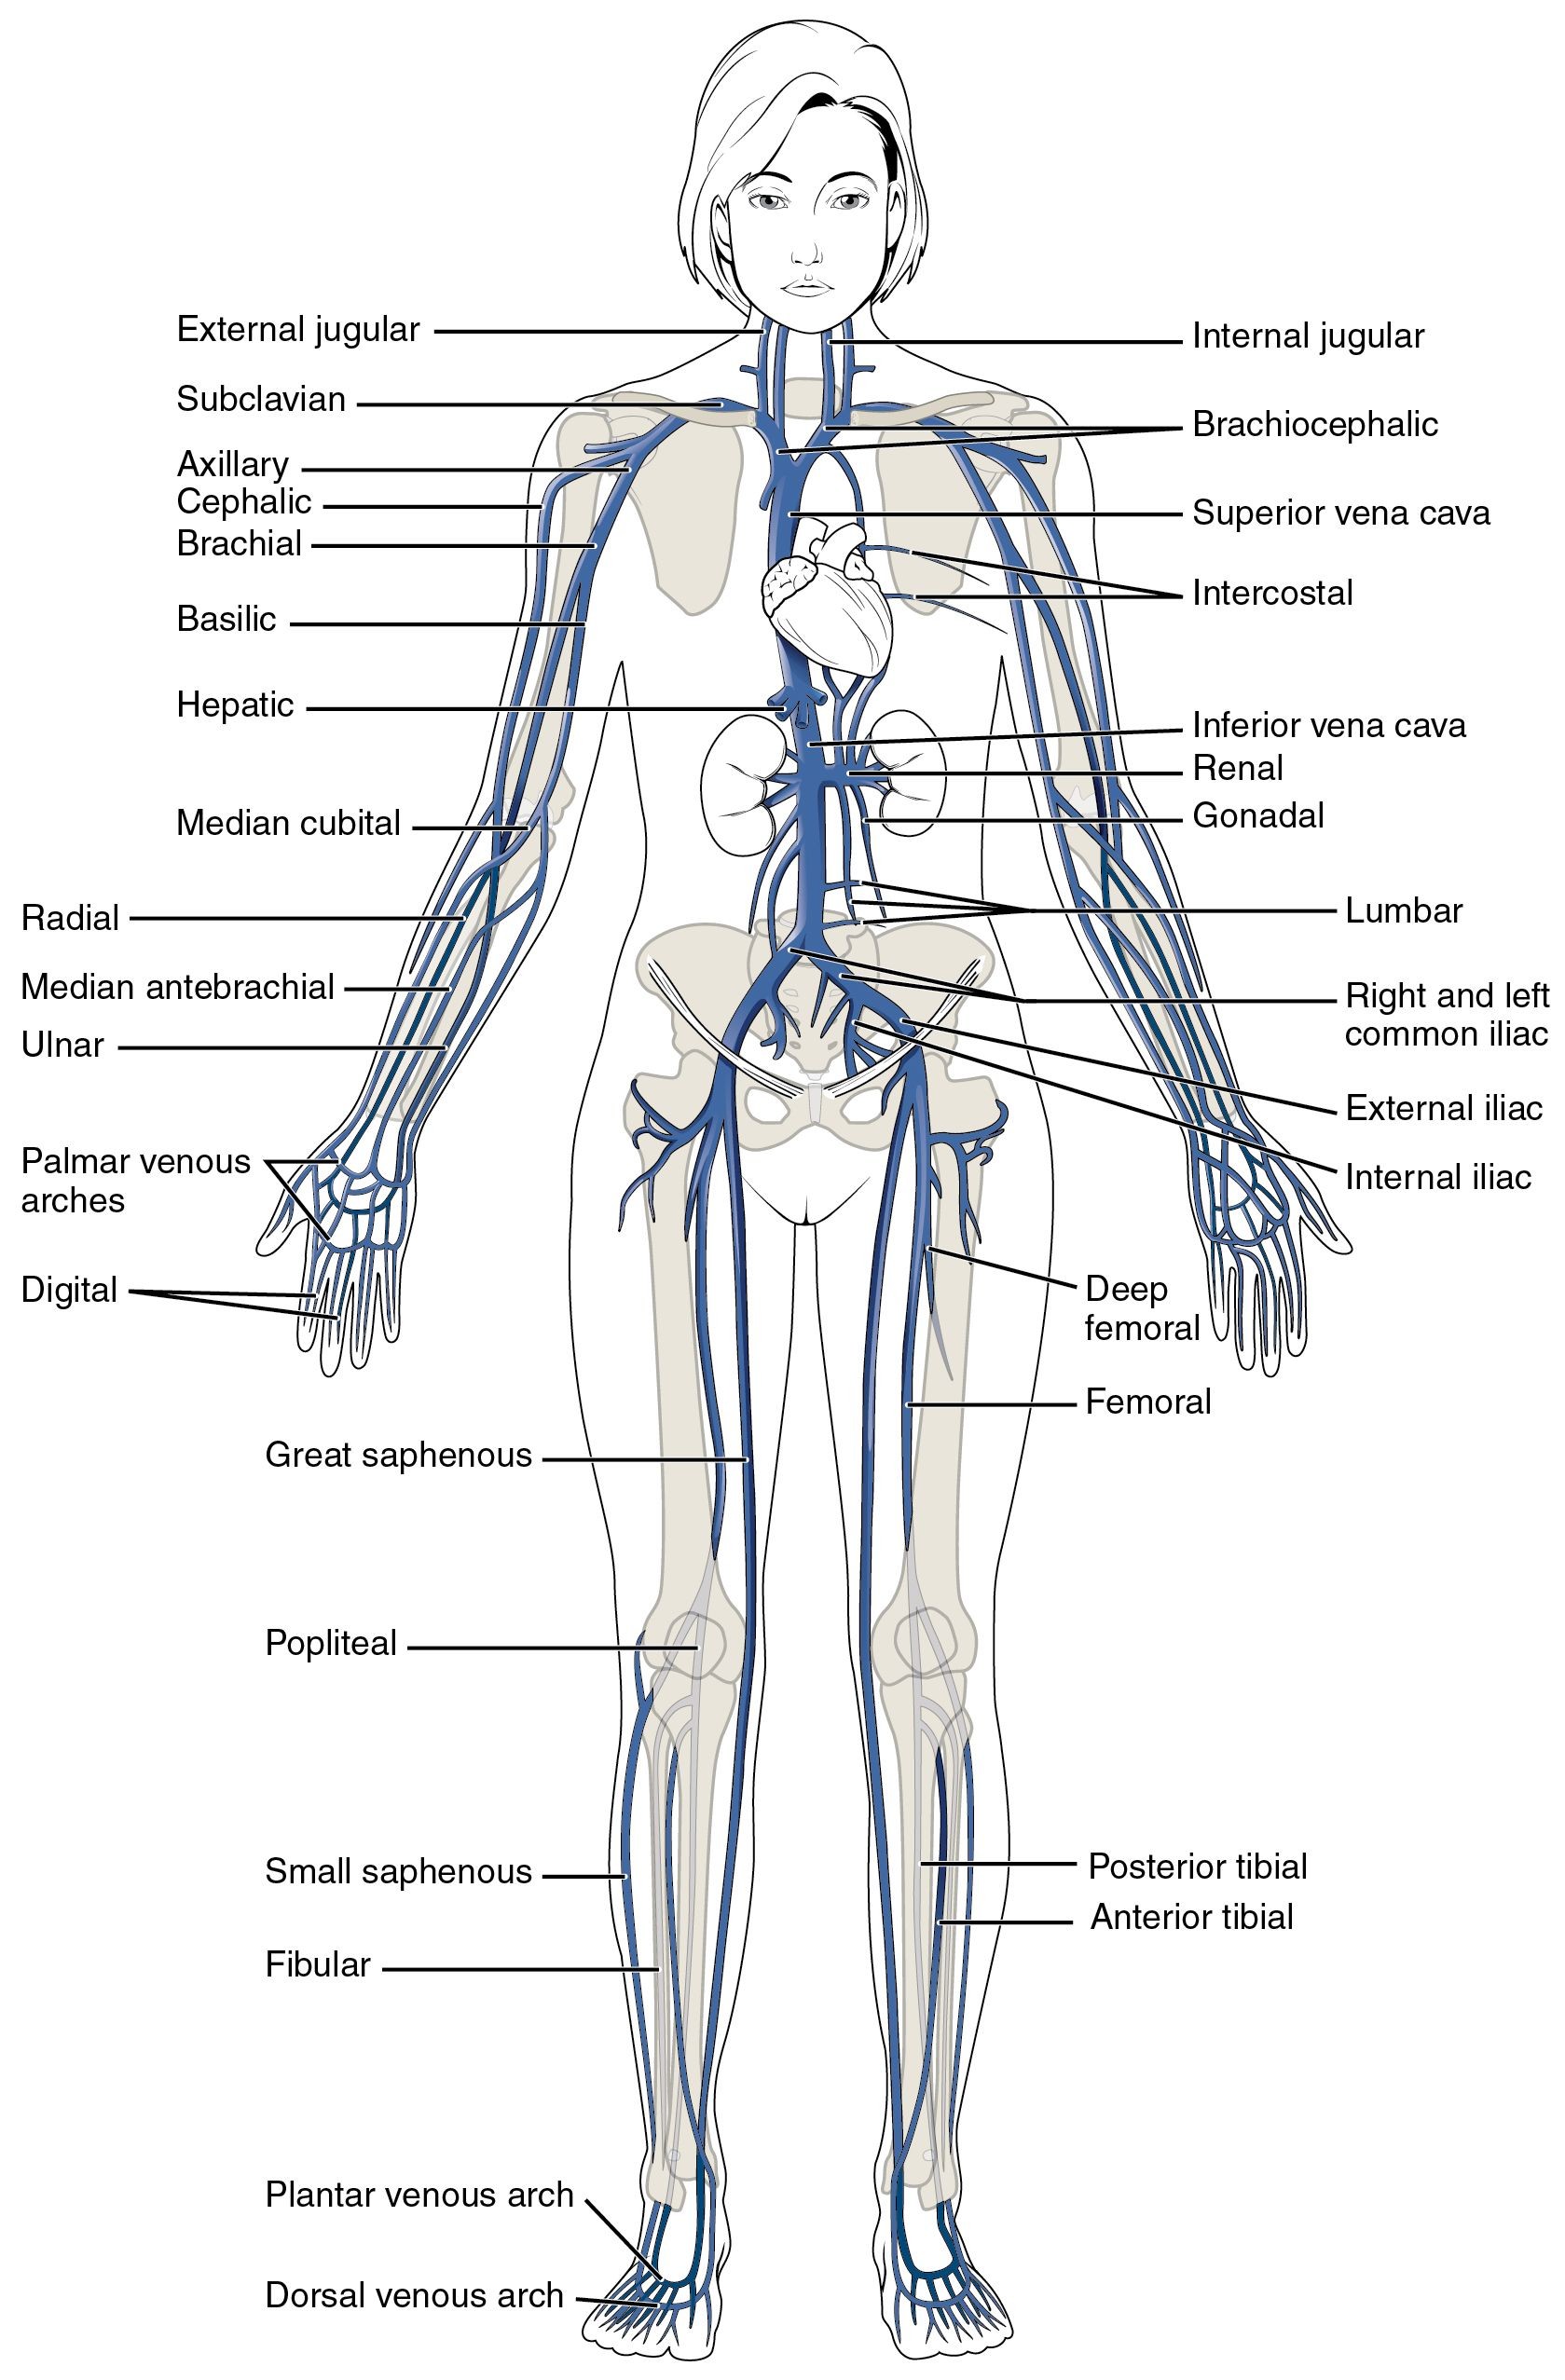 This diagram shows the major veins in the human body